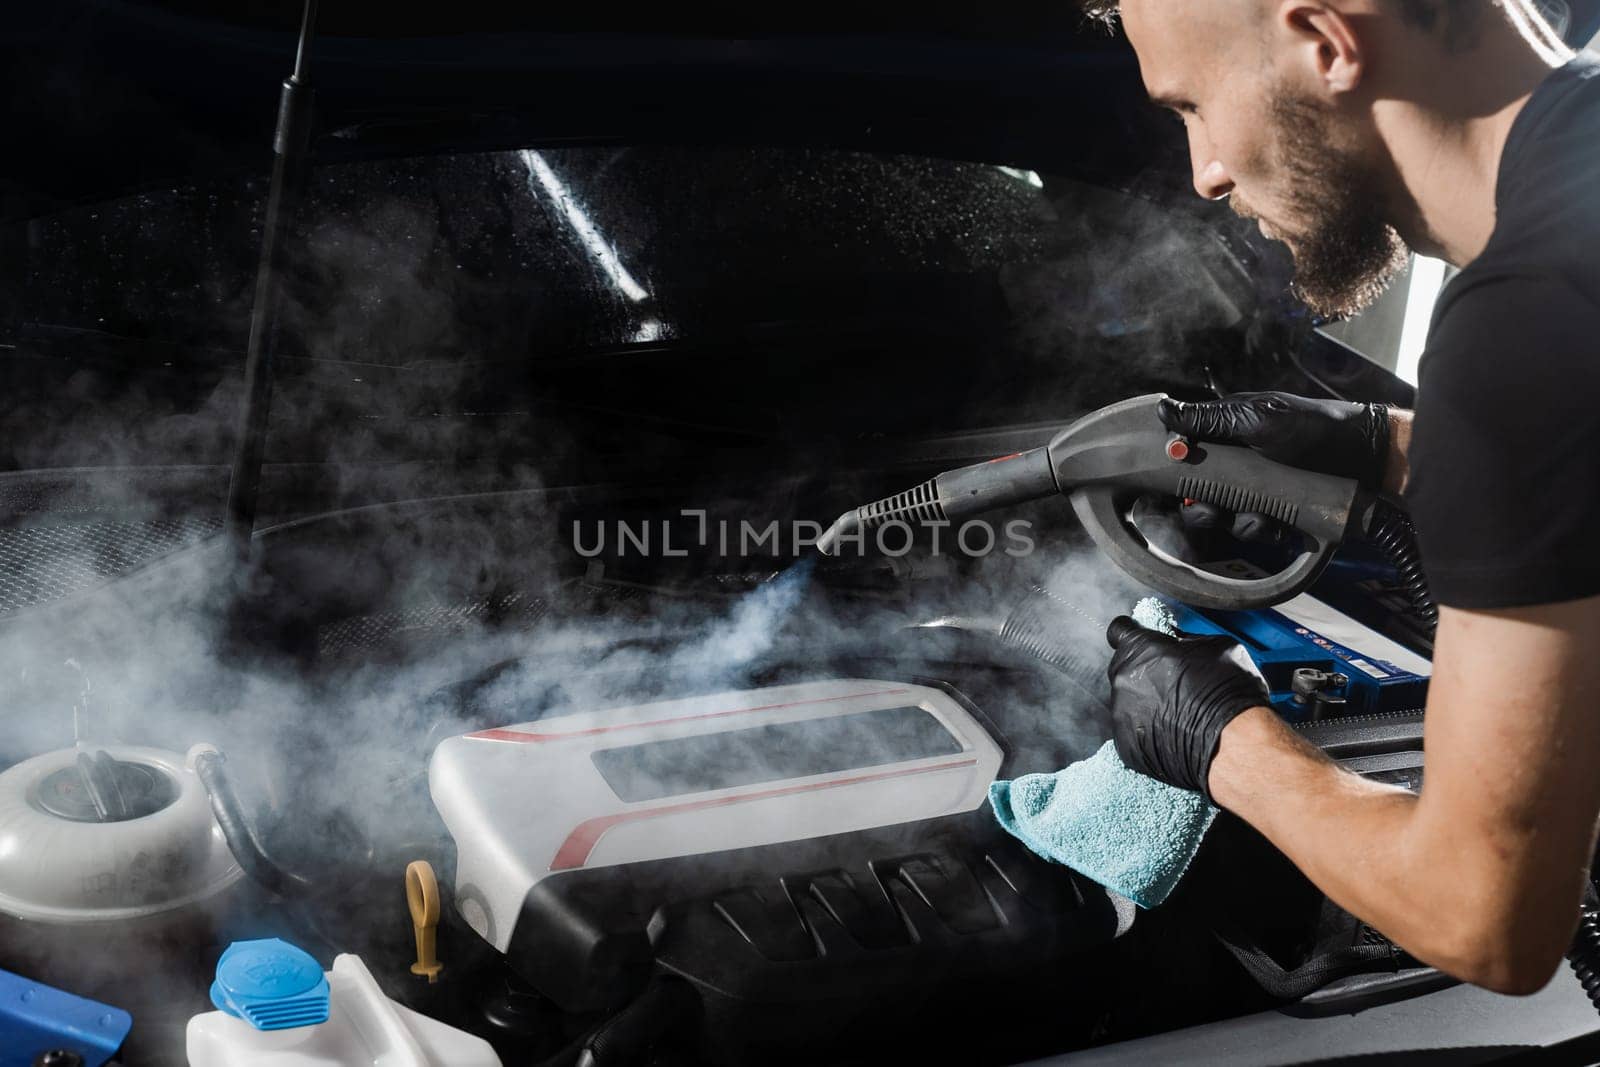 Process of steam cleaning car engine from dust and dirt. Steaming washing of motor of auto in detailing auto service